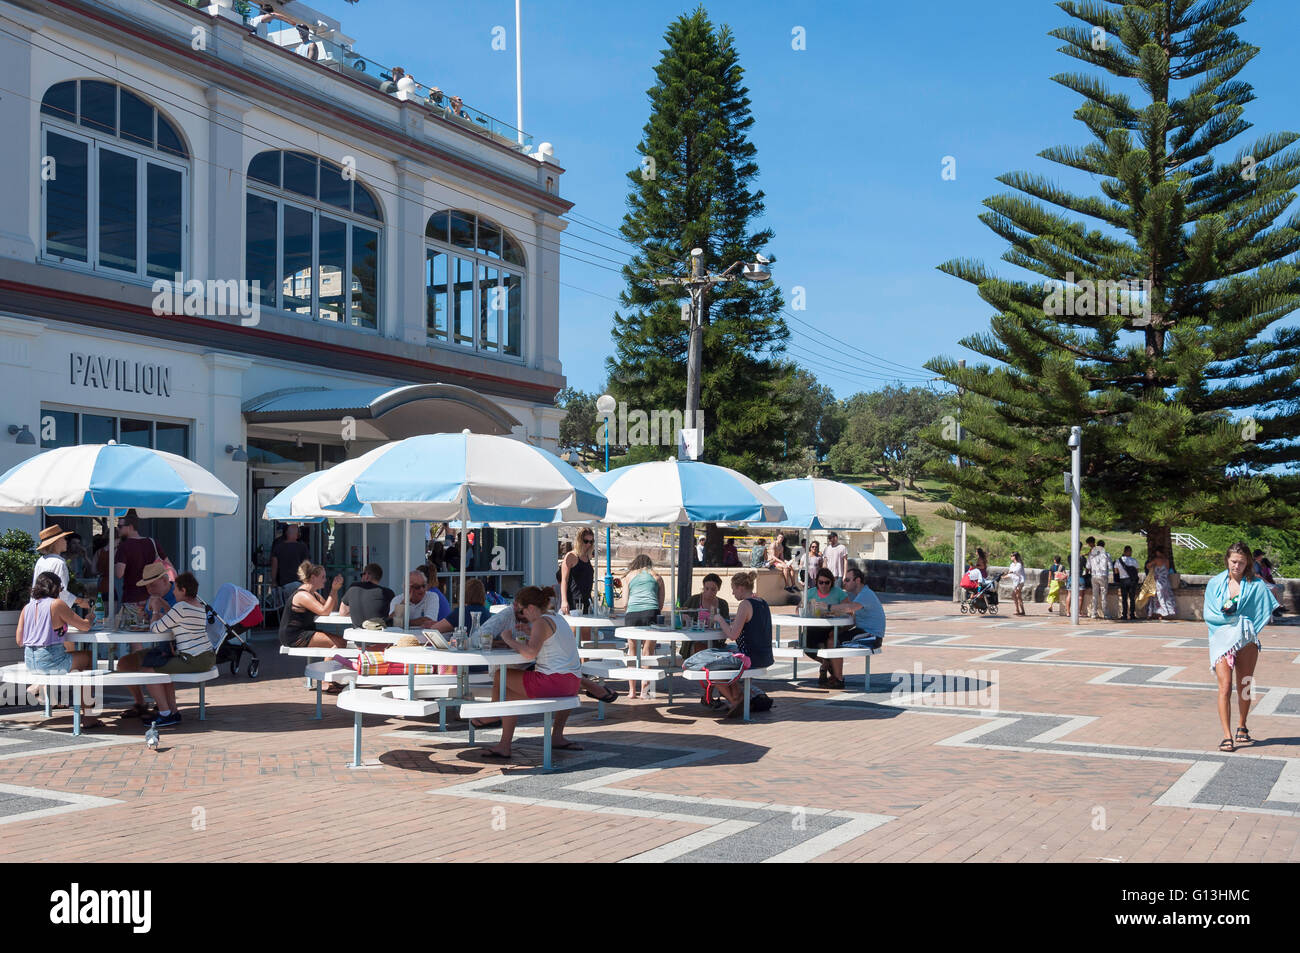 Coogee ristorante Pavilion, Coogee Beach, Coogee, Sydney, Nuovo Galles del Sud, Australia Foto Stock